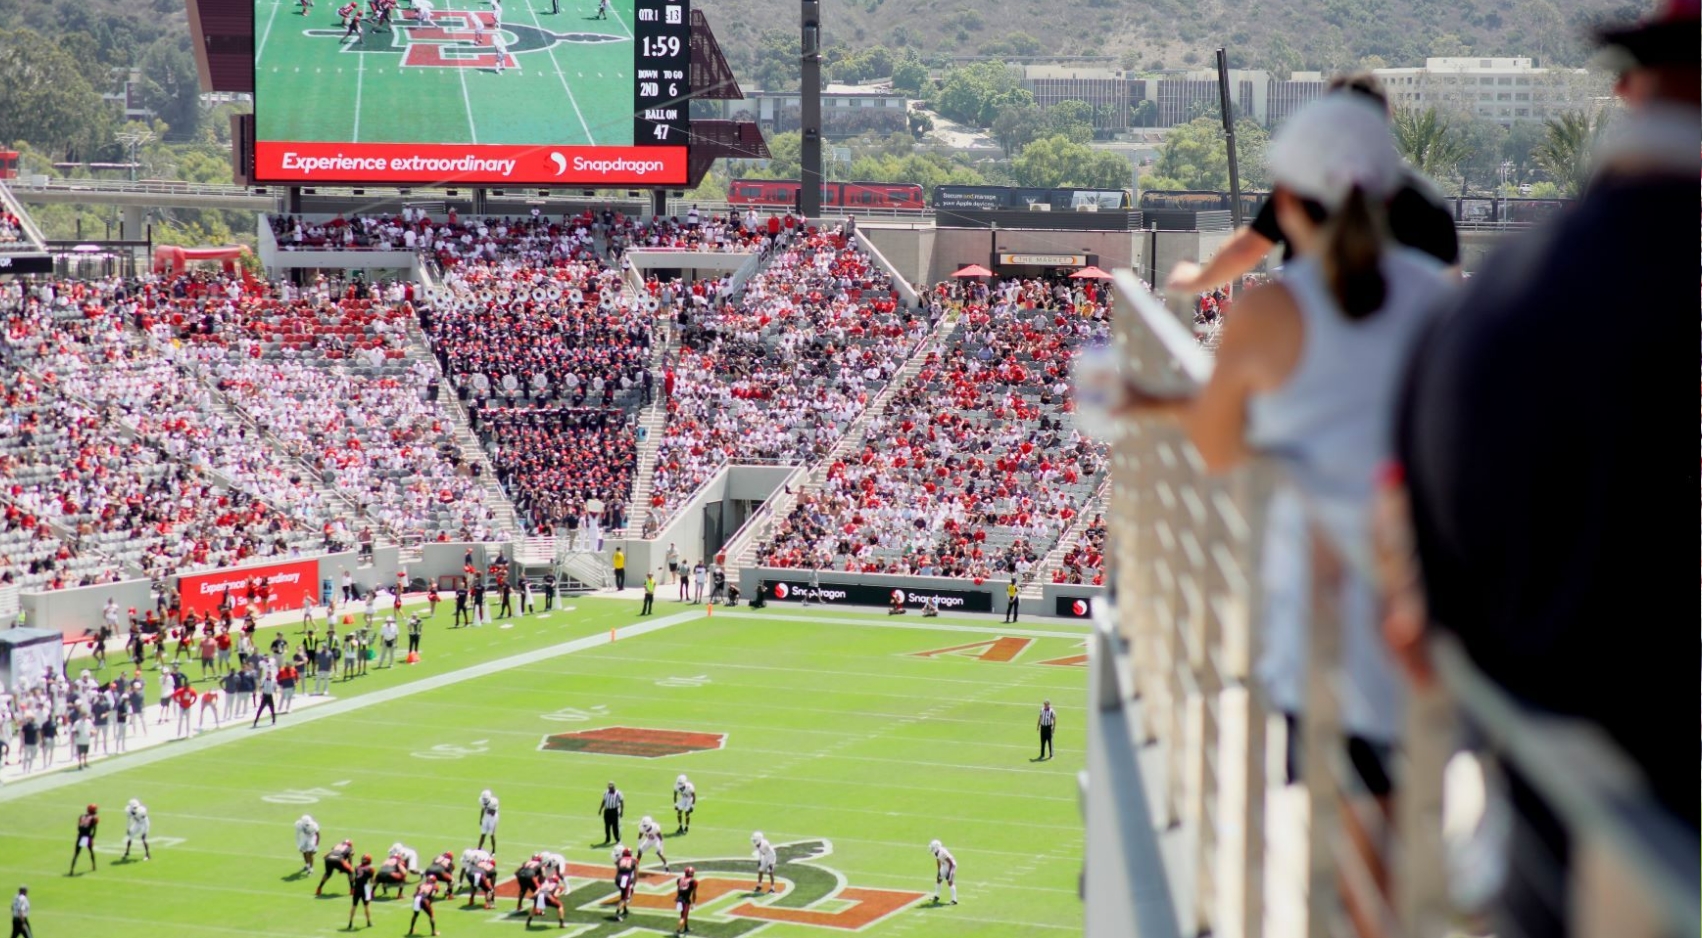 Last Saturday's game was the first official athletic event at Snapdragon Stadium, a $310 million, 35,000-seat venue that SDSU now calls home. (SDSU)